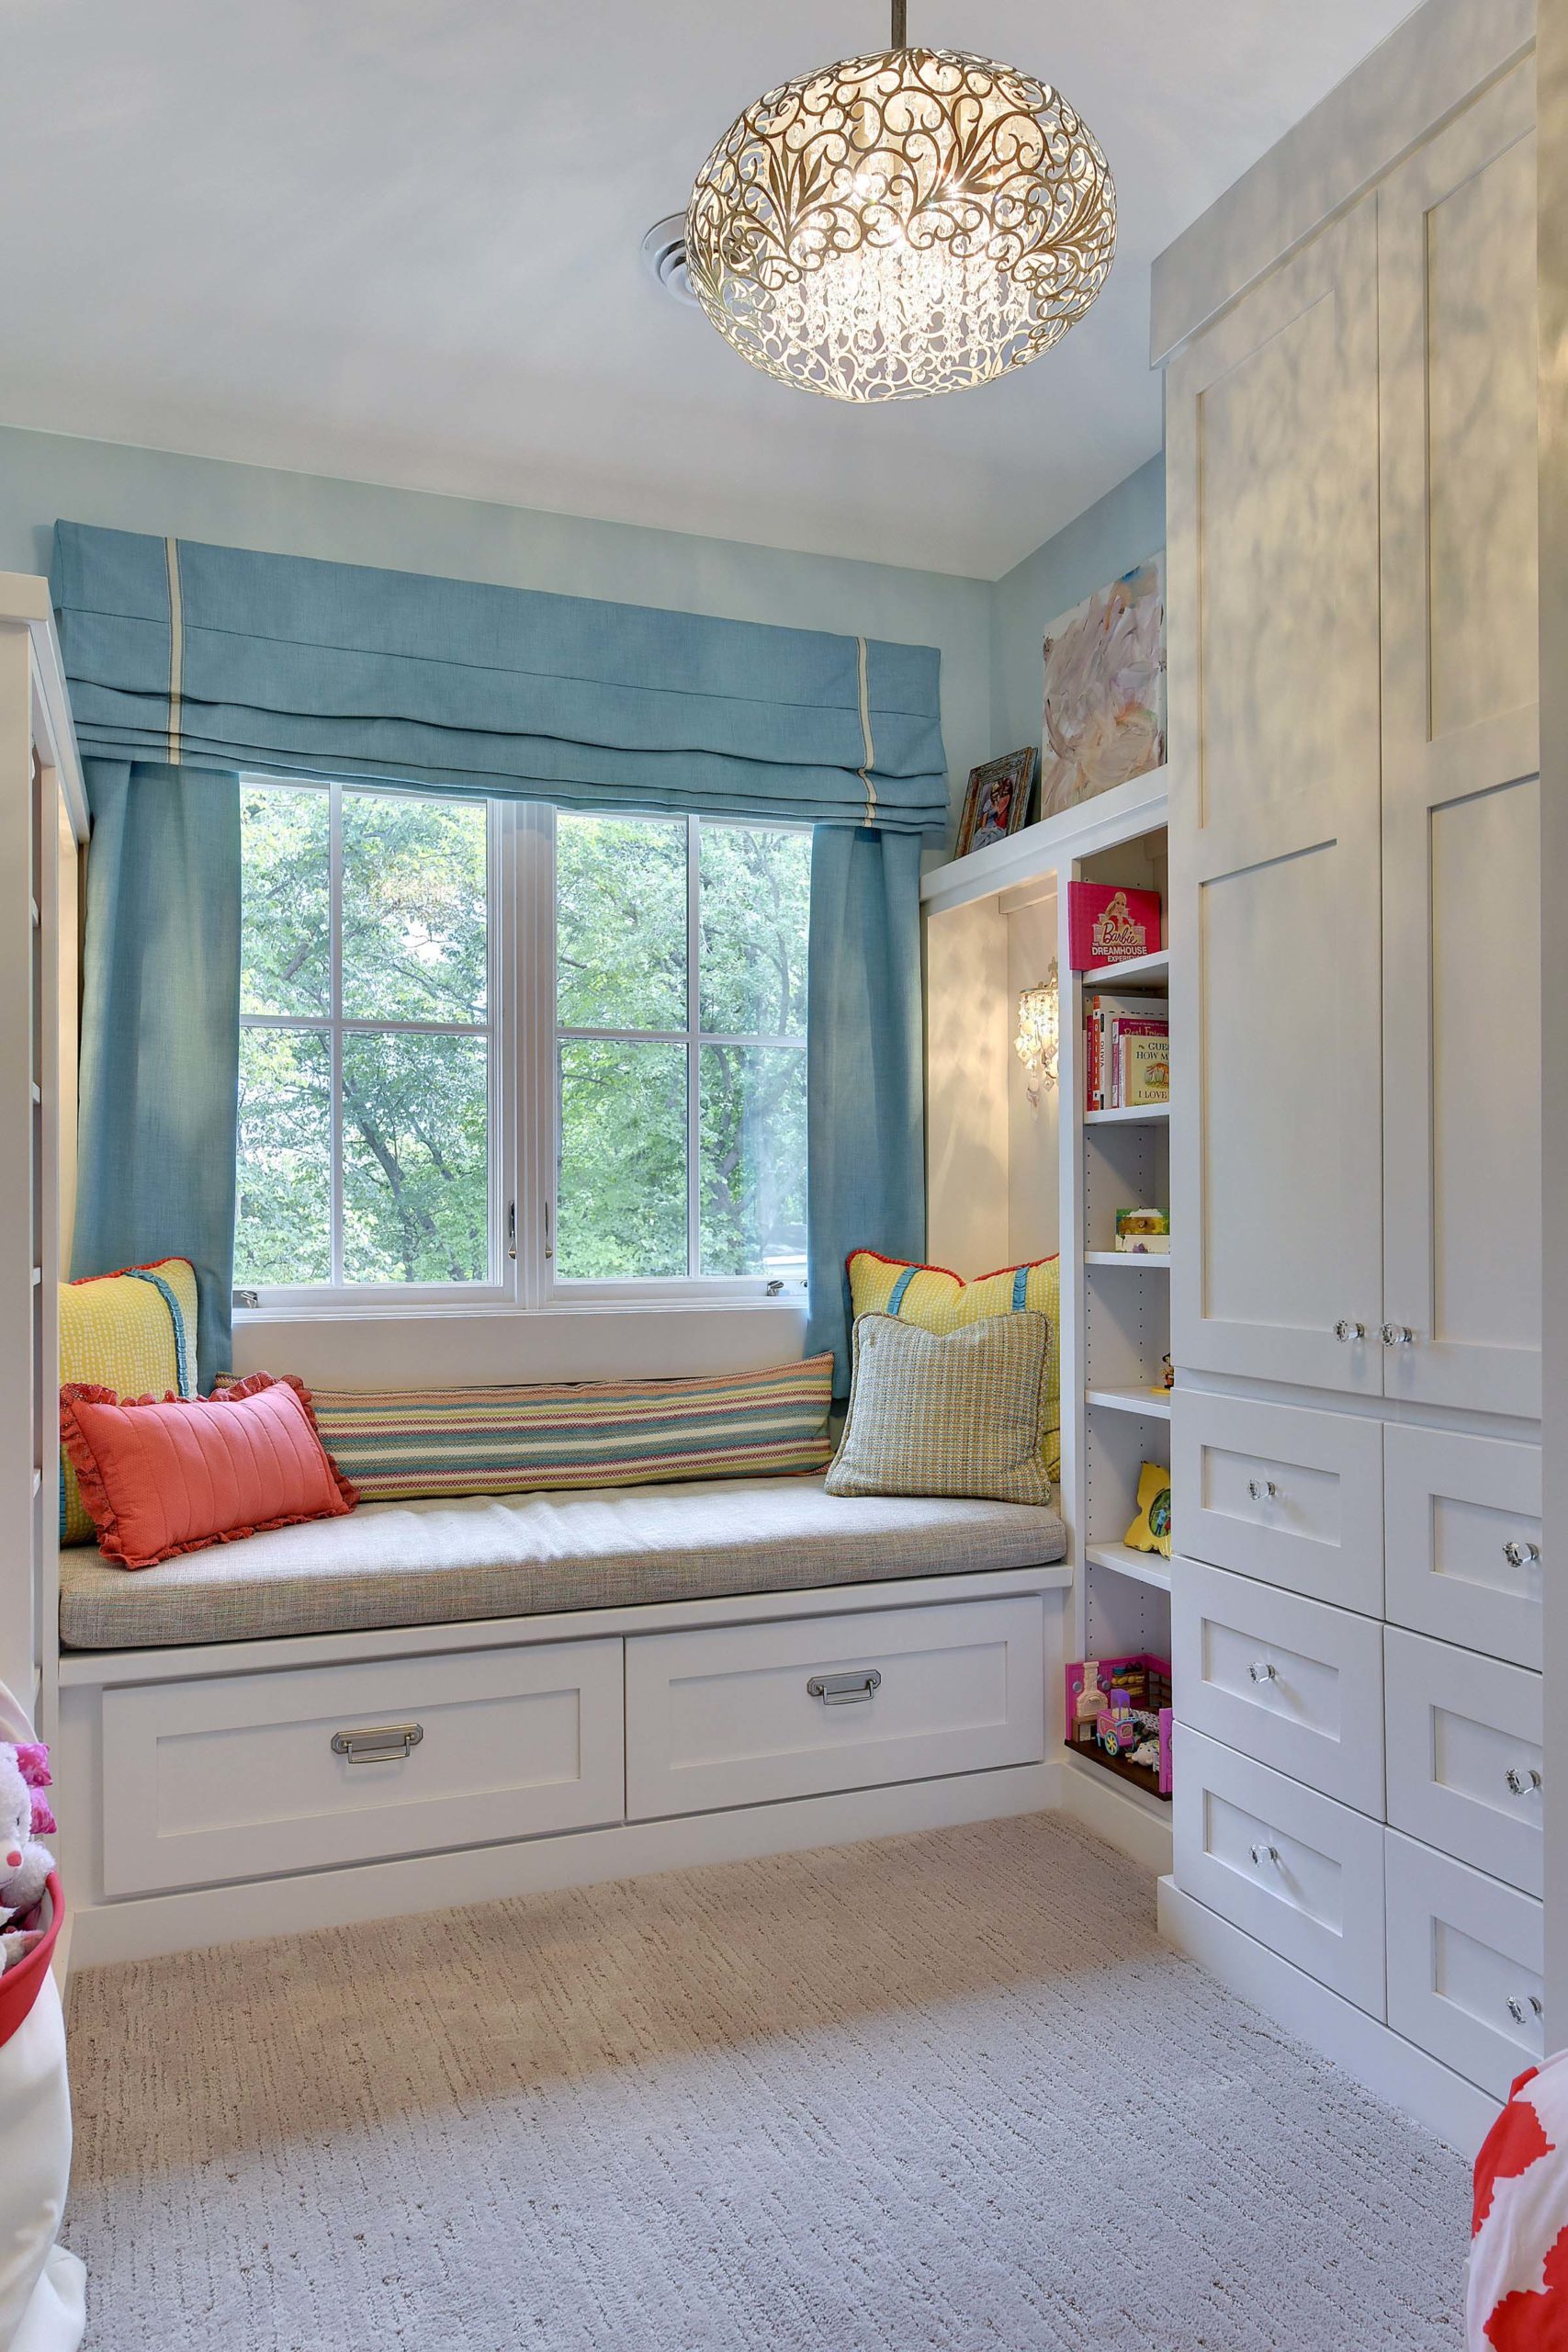 A contemporary child's bedroom with a window seat and closet.